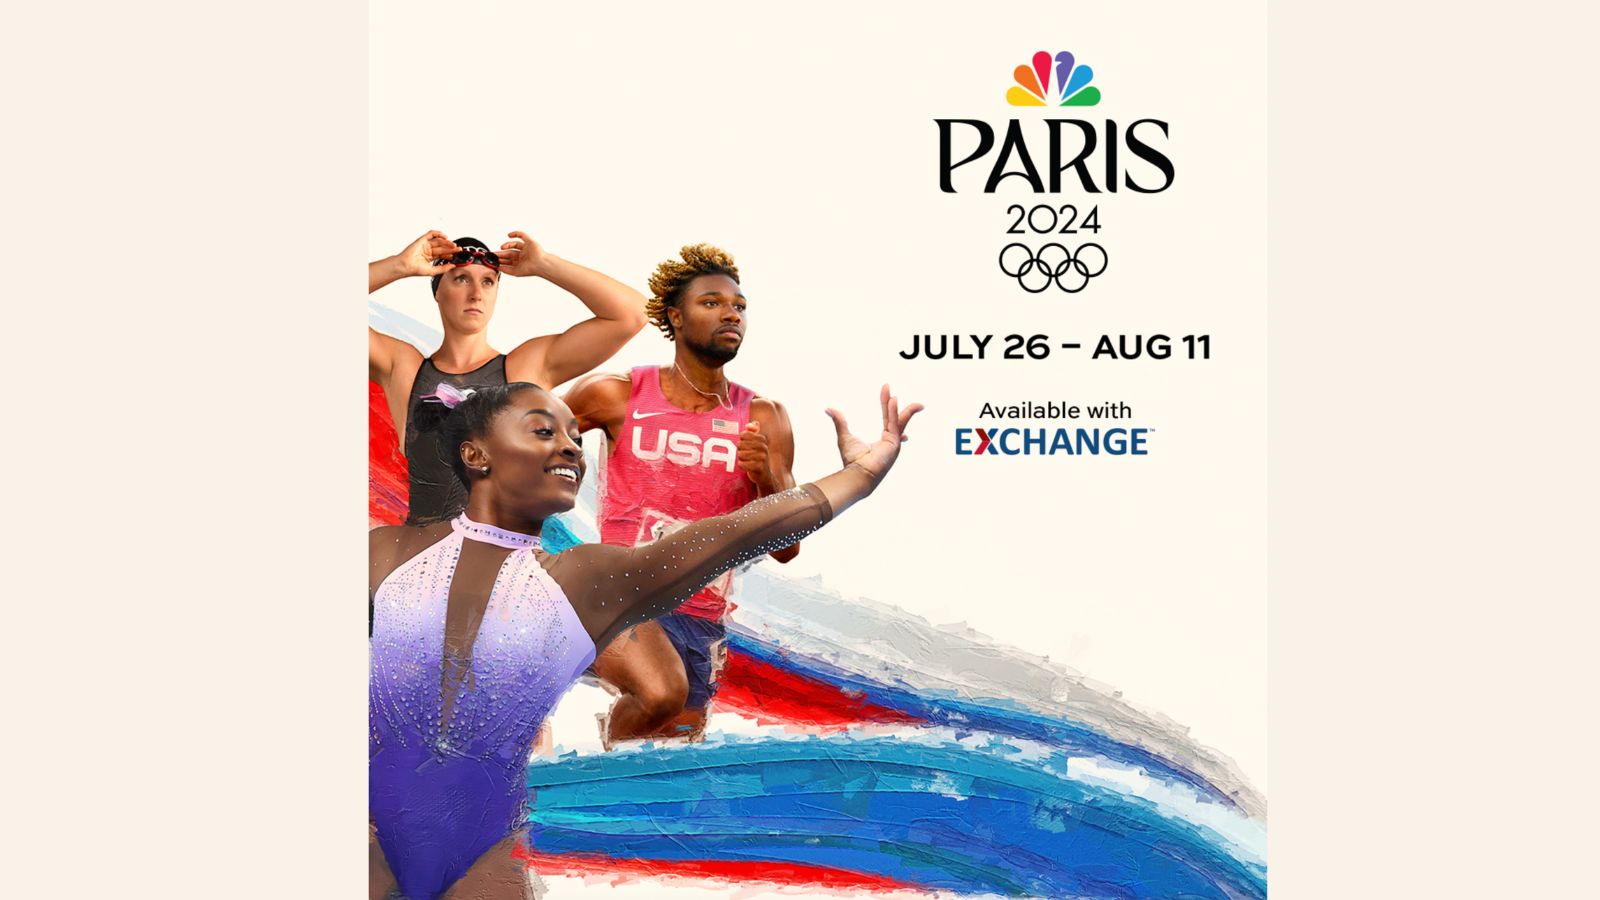 Comcast NBCUniversal Teams Up with Exchange to Provide Service Members with Free Streaming of the Olympic Games Paris 2024